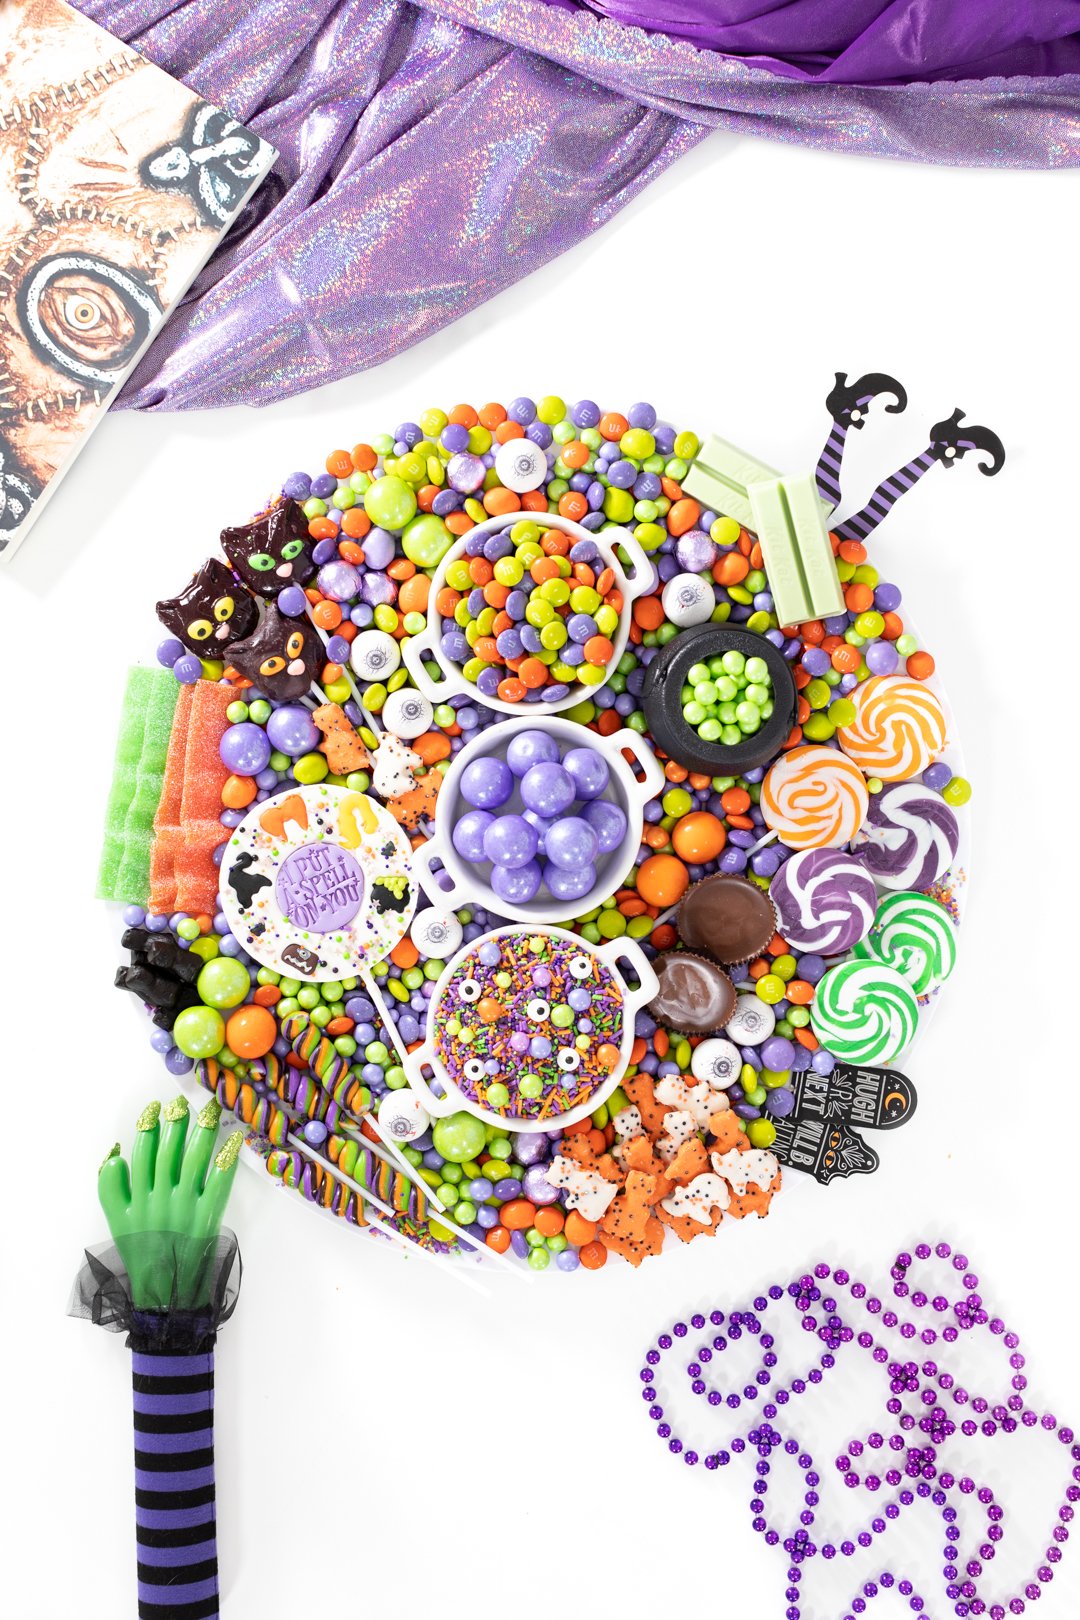 hocus pocus candy chartcuterie board for halloween. Eyeball gumballs, witch kitkats